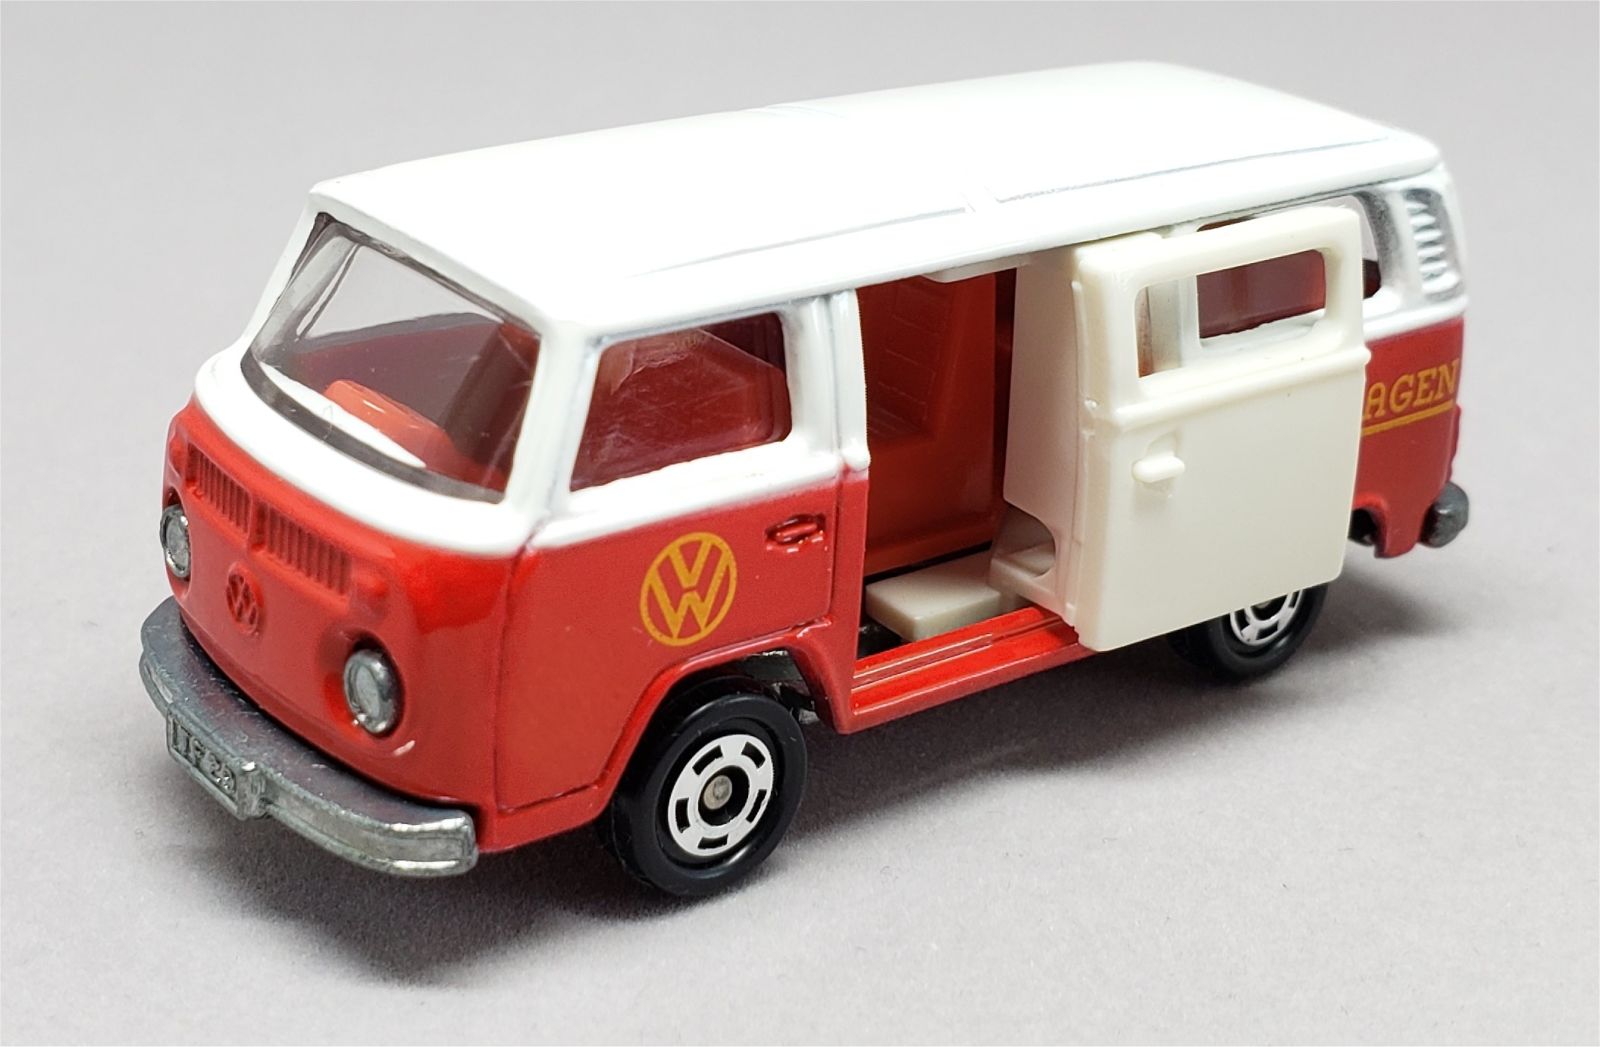 Illustration for article titled [REVIEW] Tomica Volkswagen Microbus